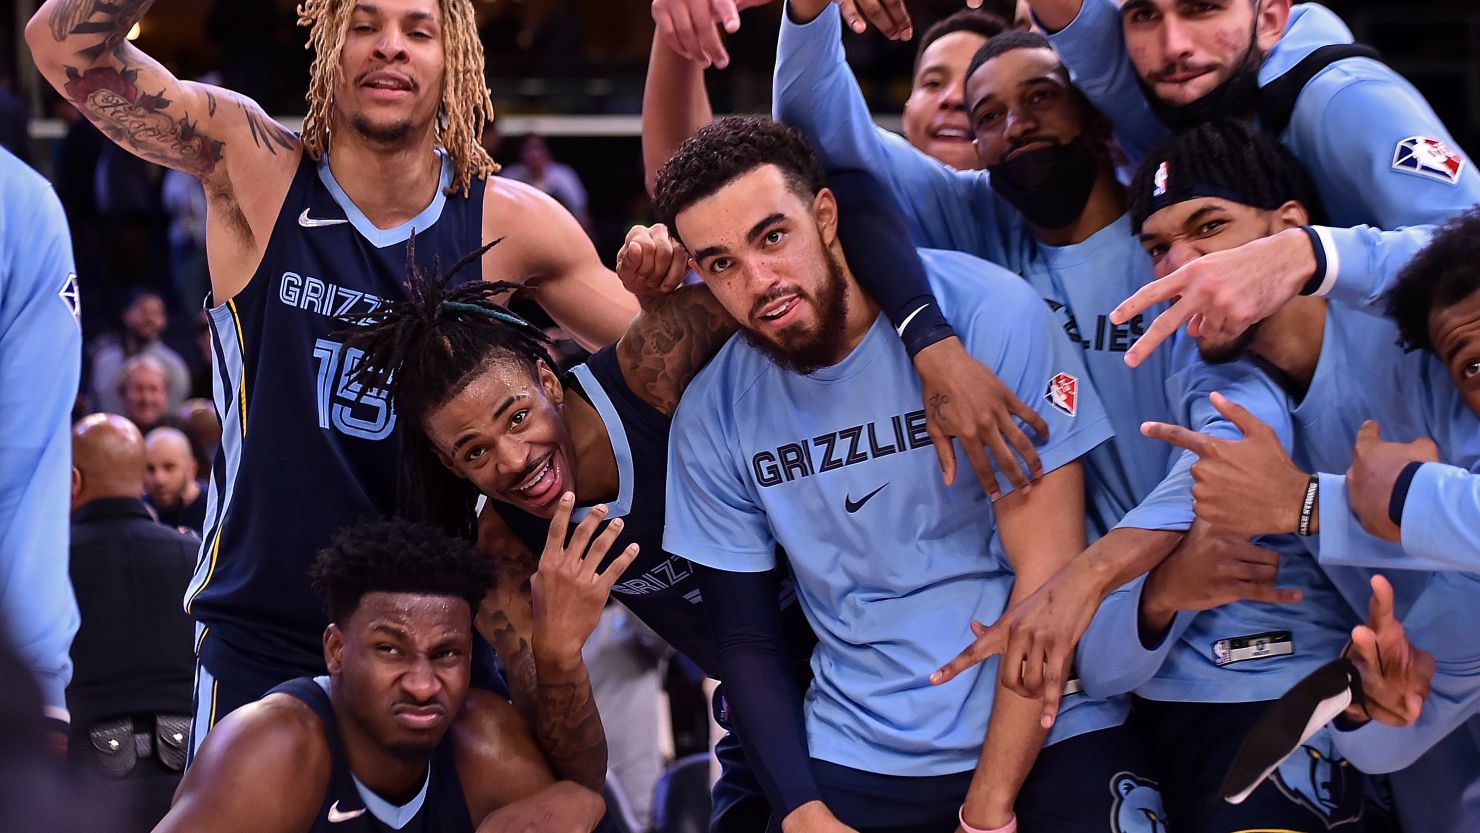 The Memphis Grizzlies pose for a photo after the game against the Minnesota Timberwolves.